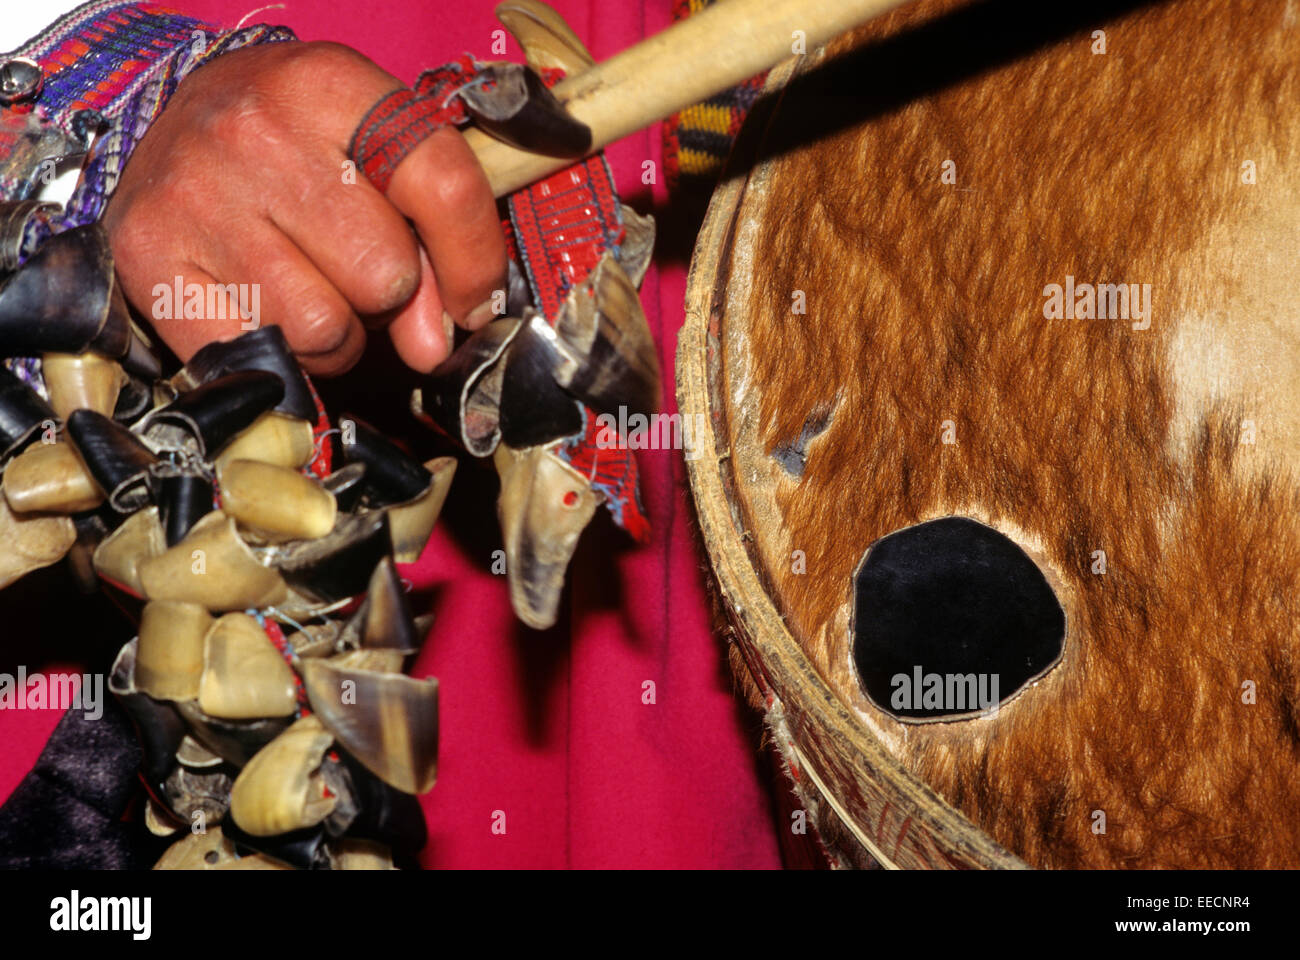 A unique instrument made from cow horns is called a coroneta. Cowhide is also used on this traditional drum, Ecuador, SA Stock Photo